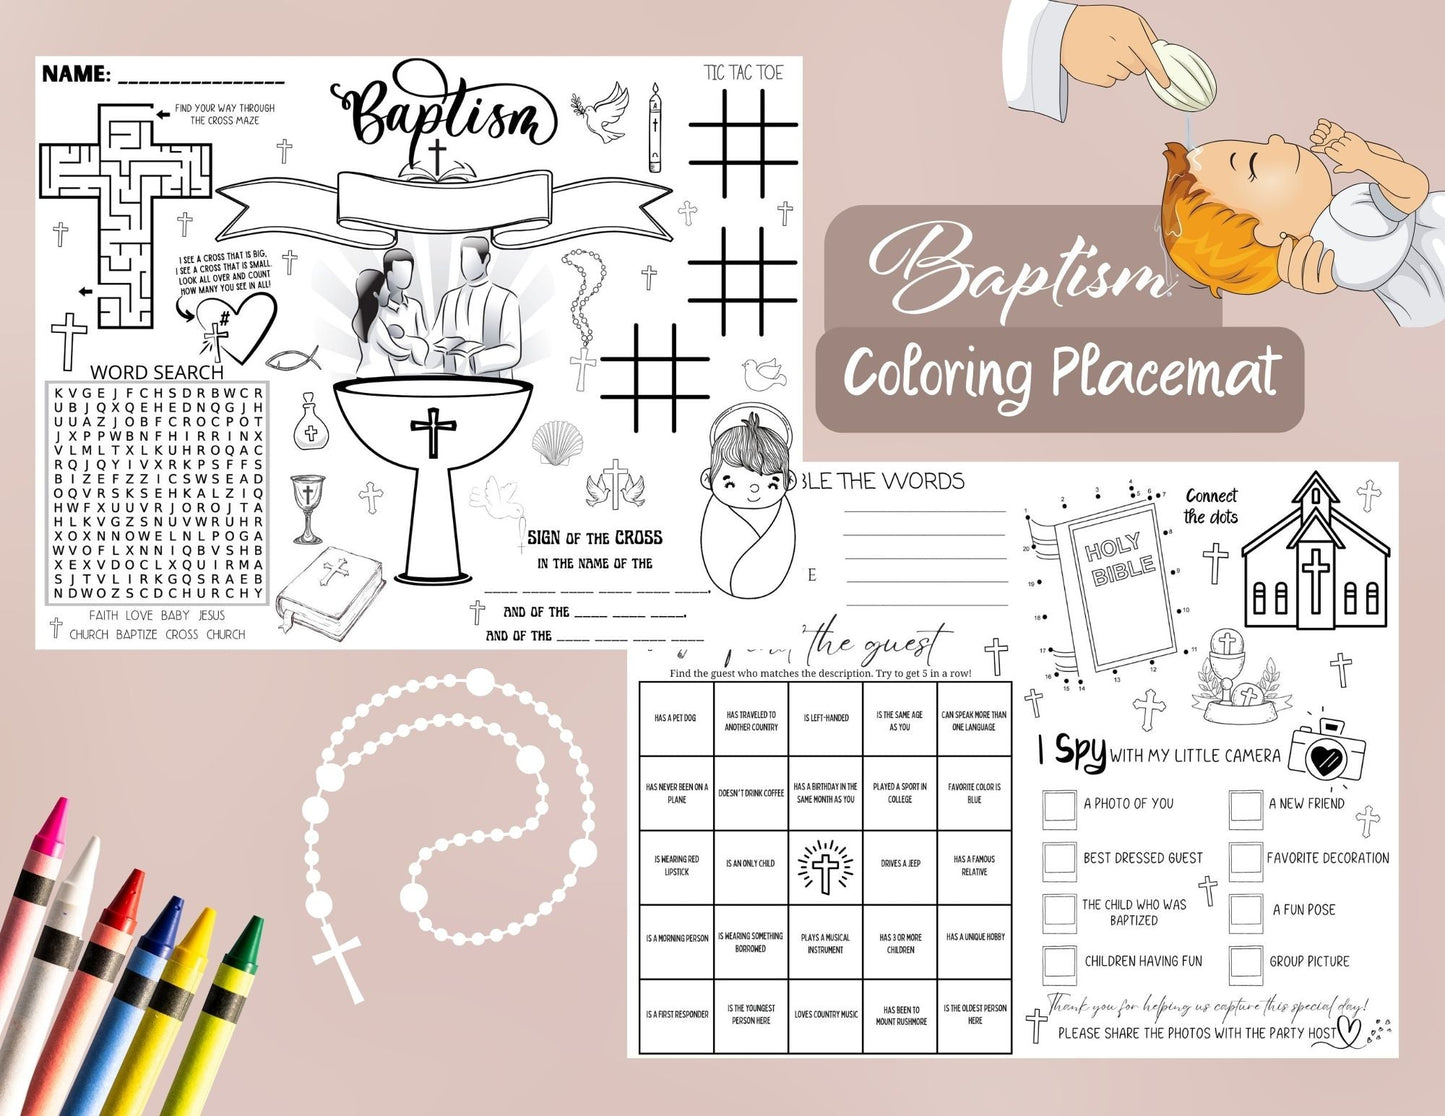 Baptism Activity Coloring Placemat - Games for Kids and Adults - Bingo, Crossword Puzzle, and so much more! - Twinklette